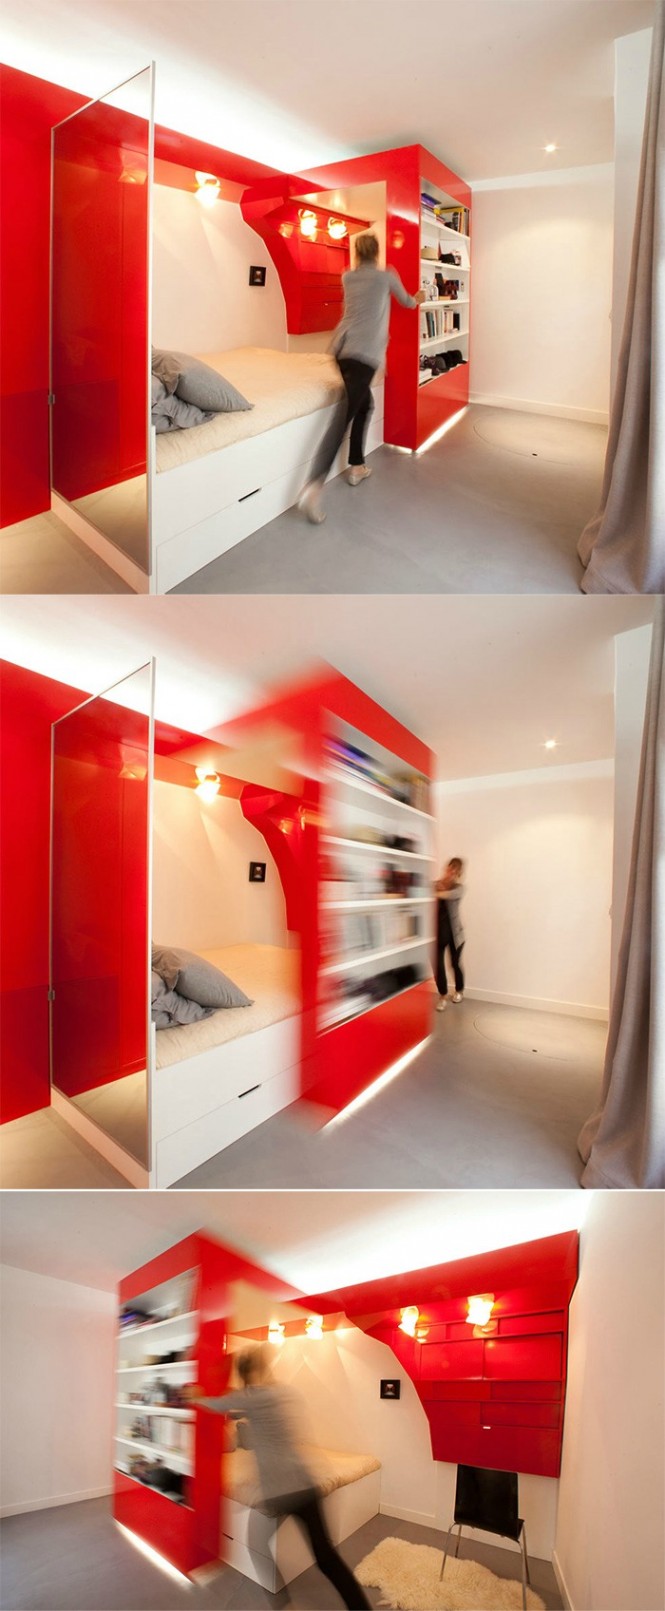 Red And And Unique Red And White Bed And Shelves Furniture In Modern Design Used Modular Decoration Ideas For Inspiration Bedroom 30 Romantic Red Bedroom Design For A Comfortable Appearances